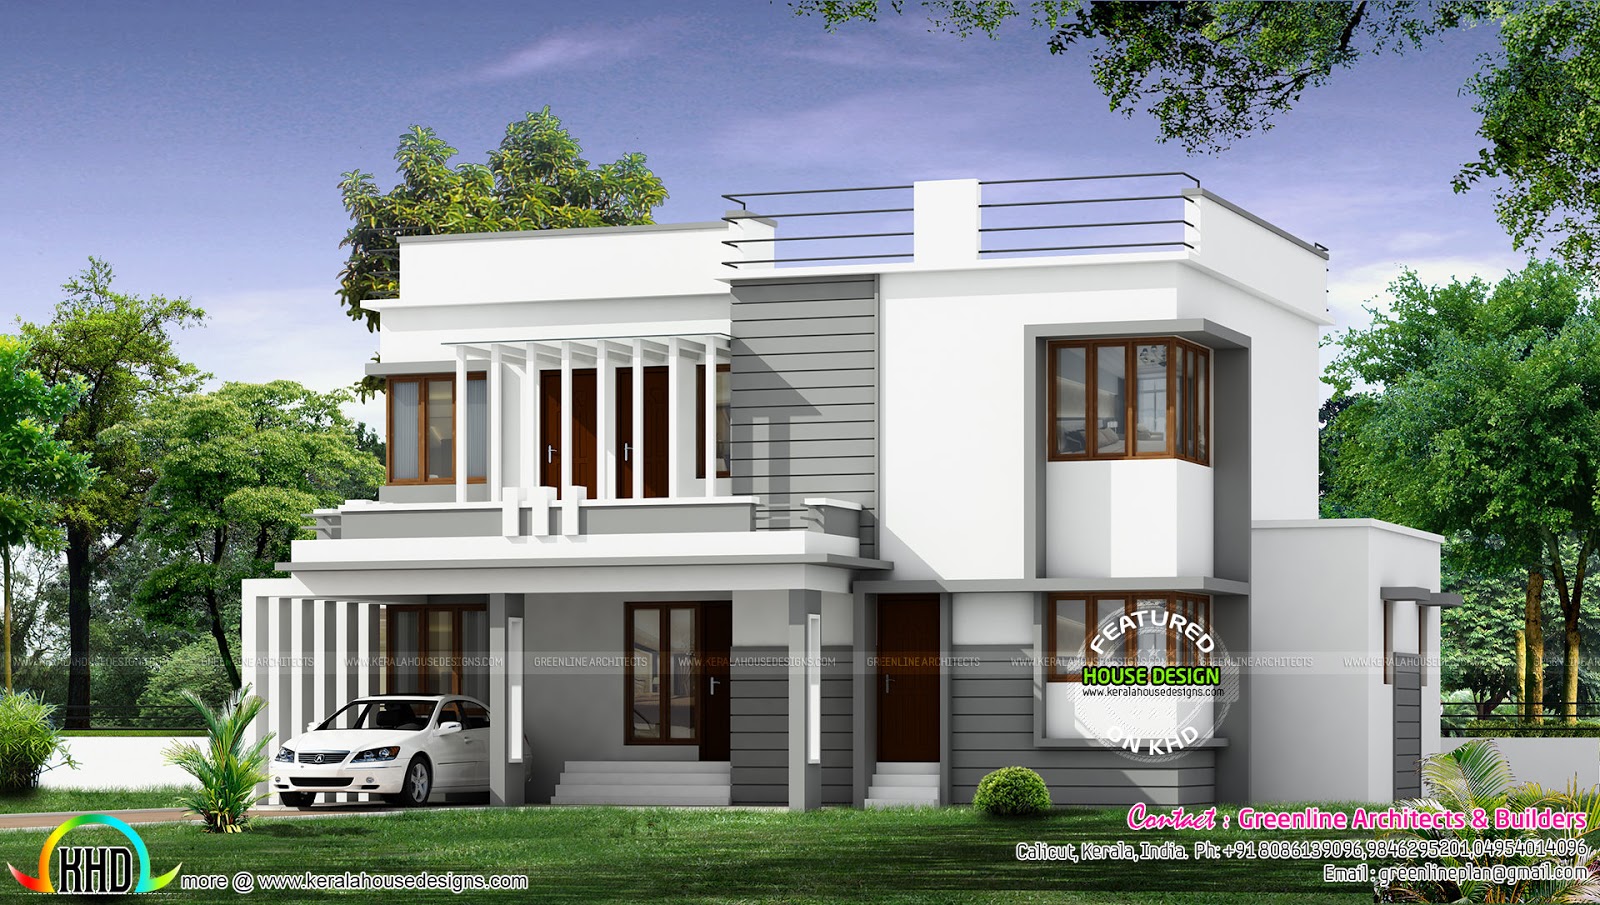 New modern house architecture - Kerala home design and floor plans